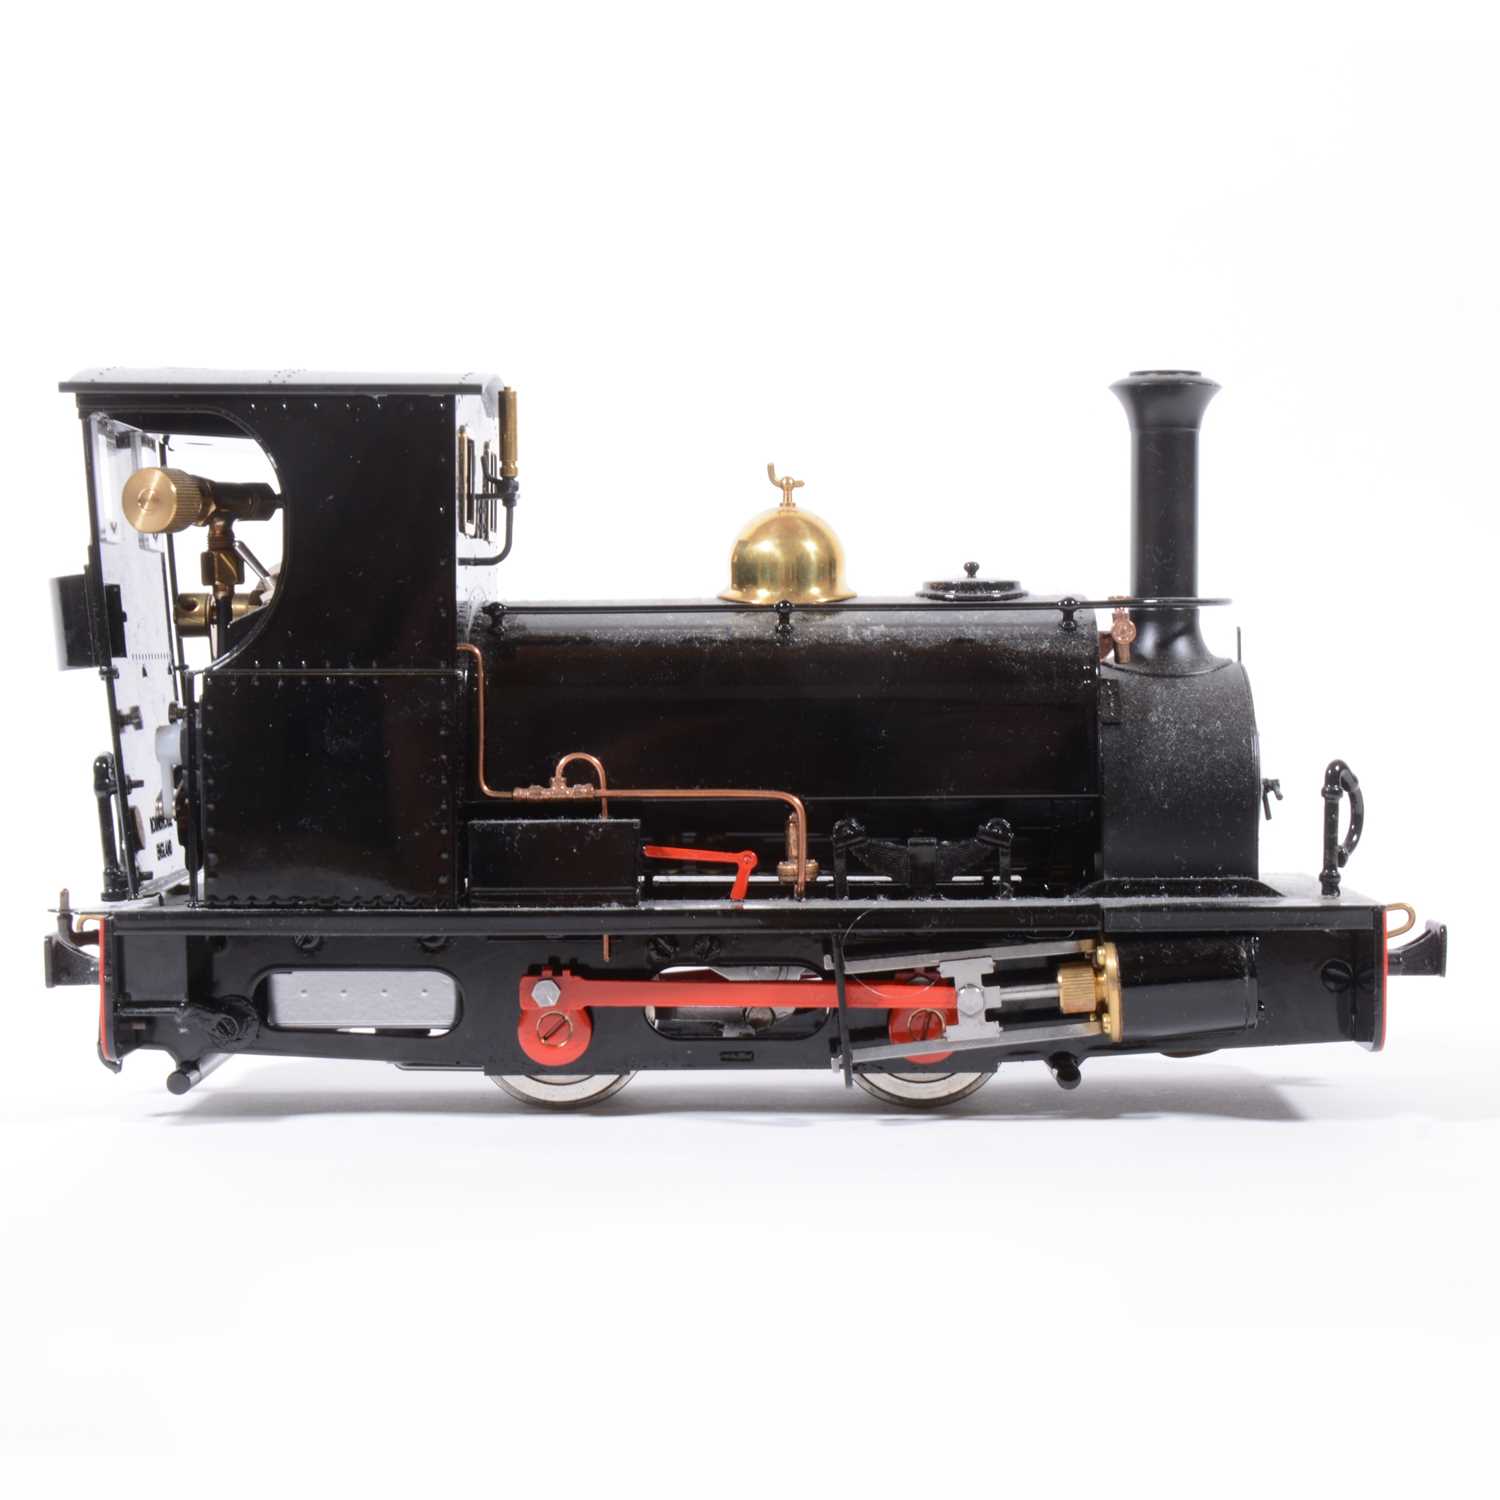 Lot 12 - Roundhouse live steam, gauge 1 / G scale, 32mm locomotive, 'Lilla' 0-4-0, added 'Guthlaxton' label to sides, with instructions, accessories and box, with RC